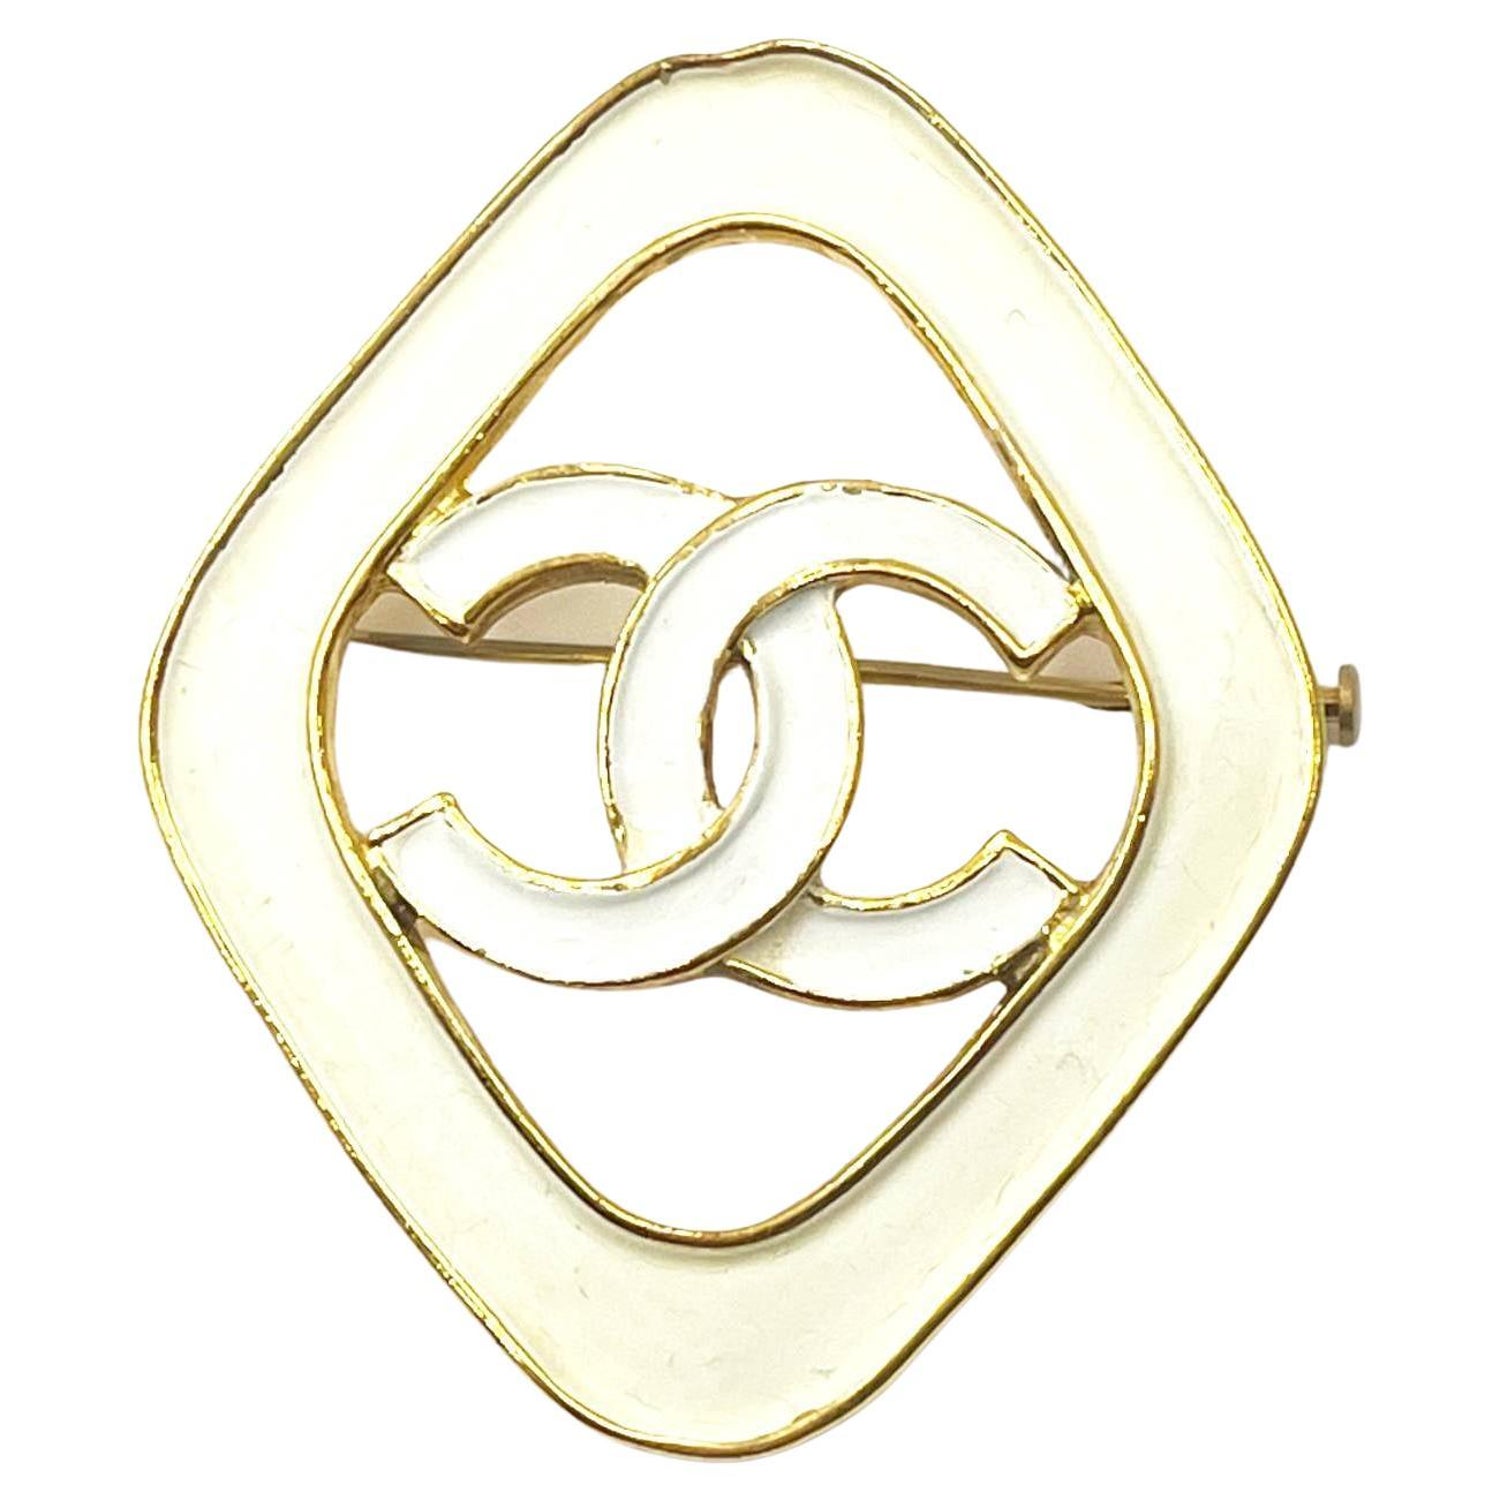 Chanel Vintage Gold Metal Cambon Paris Arrow and Heart CC Brooch, 1993, Vintage Jewelry (Very Good)